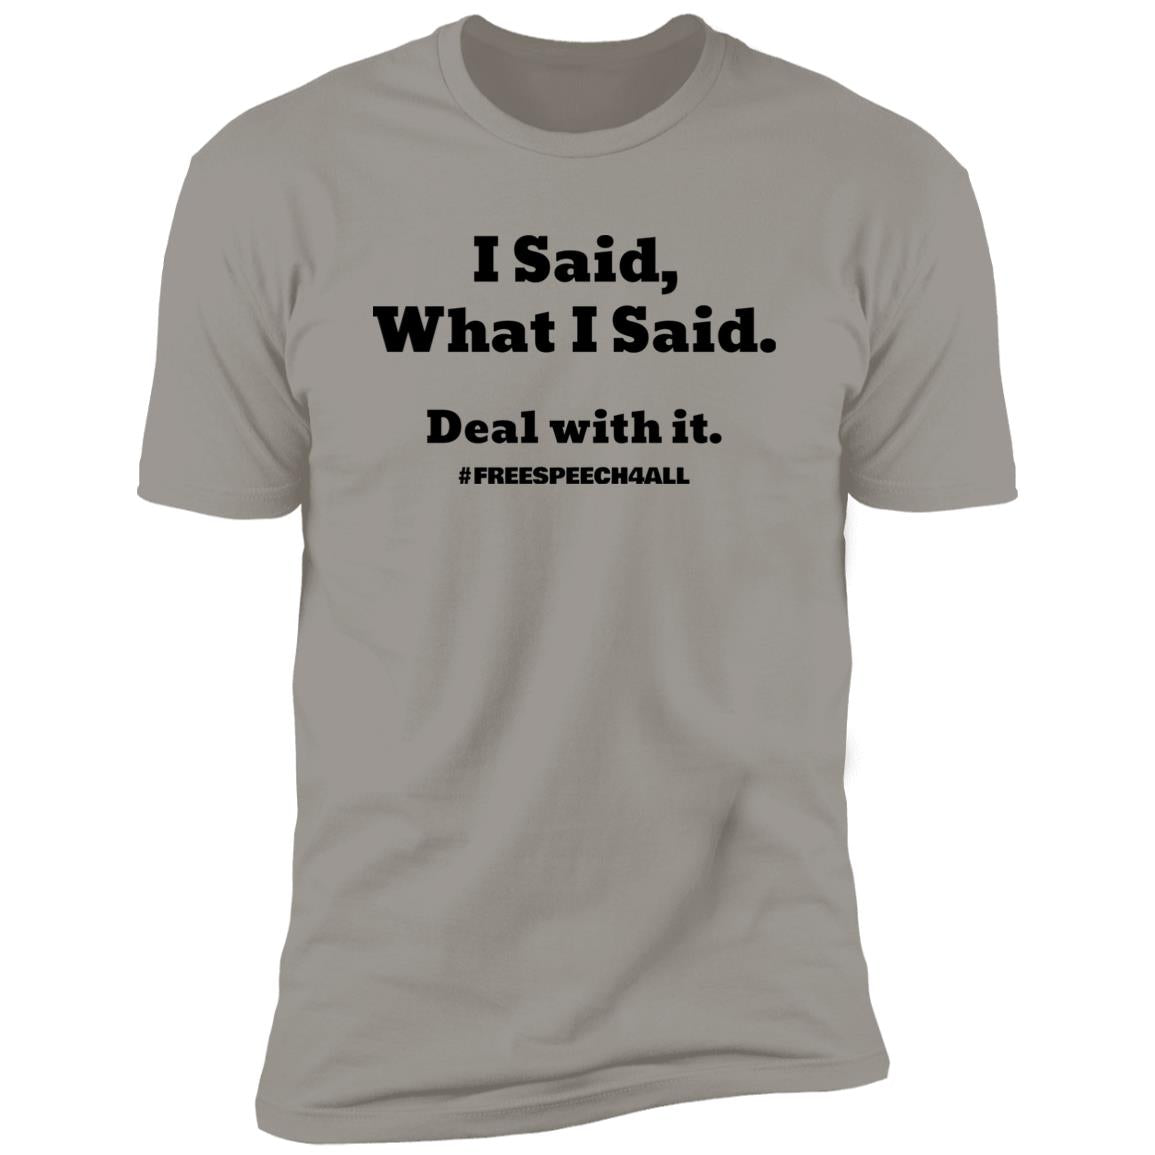 Deal with It  Premium Short Sleeve T-Shirt